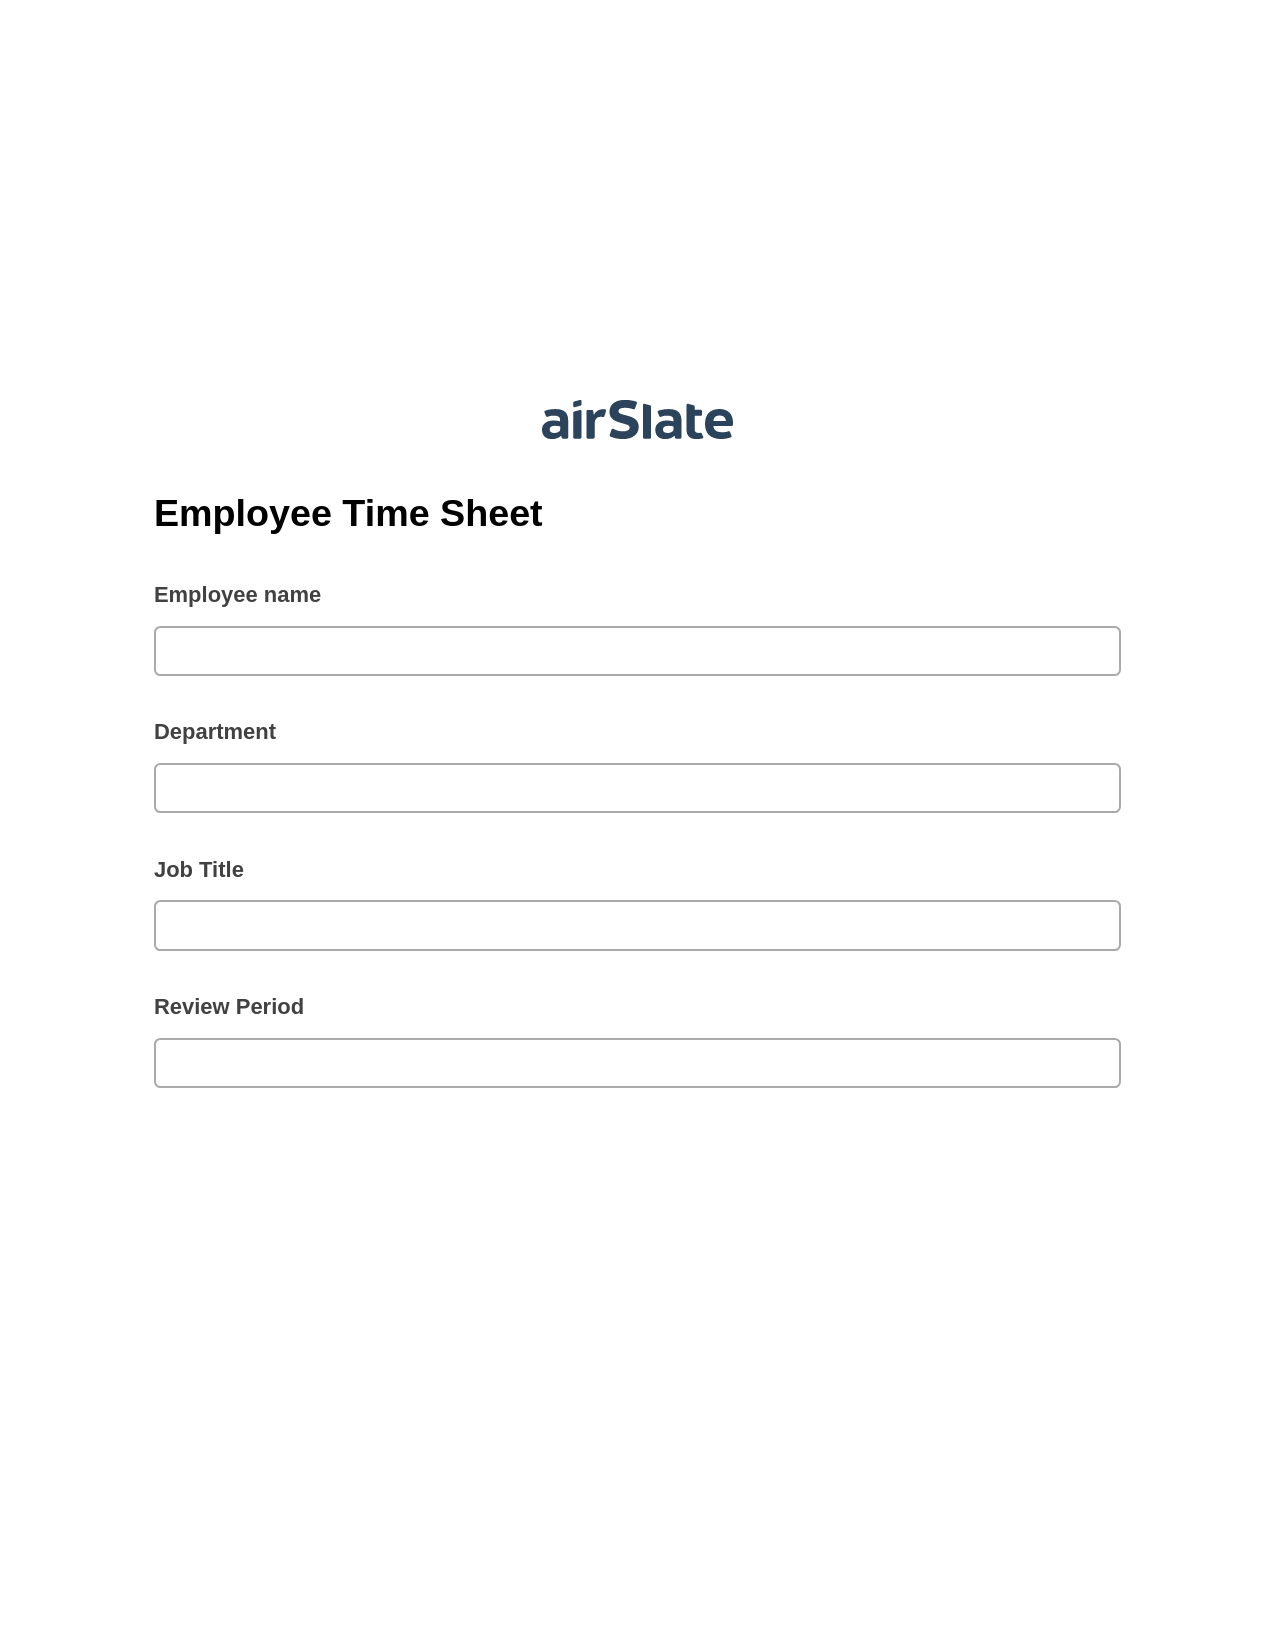 Employee Time Sheet Pre-fill from Excel Spreadsheet Bot, Update Audit Trail Bot, Archive to Dropbox Bot